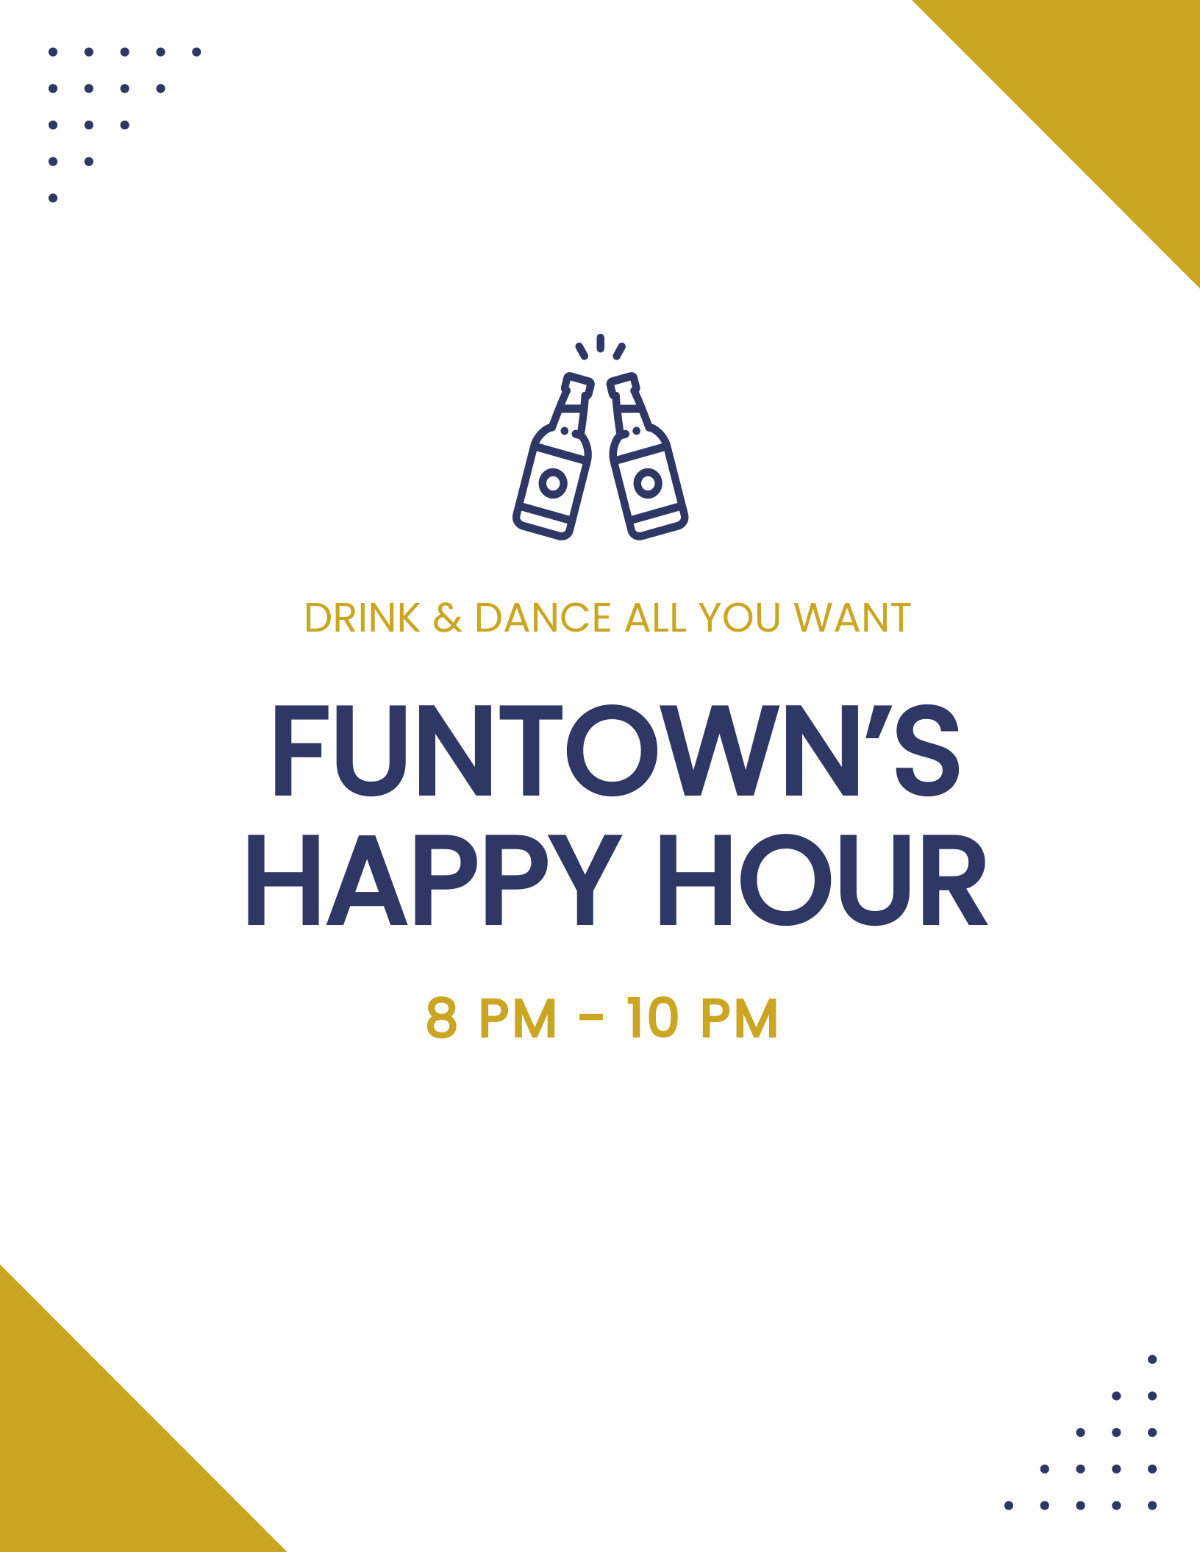 Free Happy Hour Advertisement Flyer Template